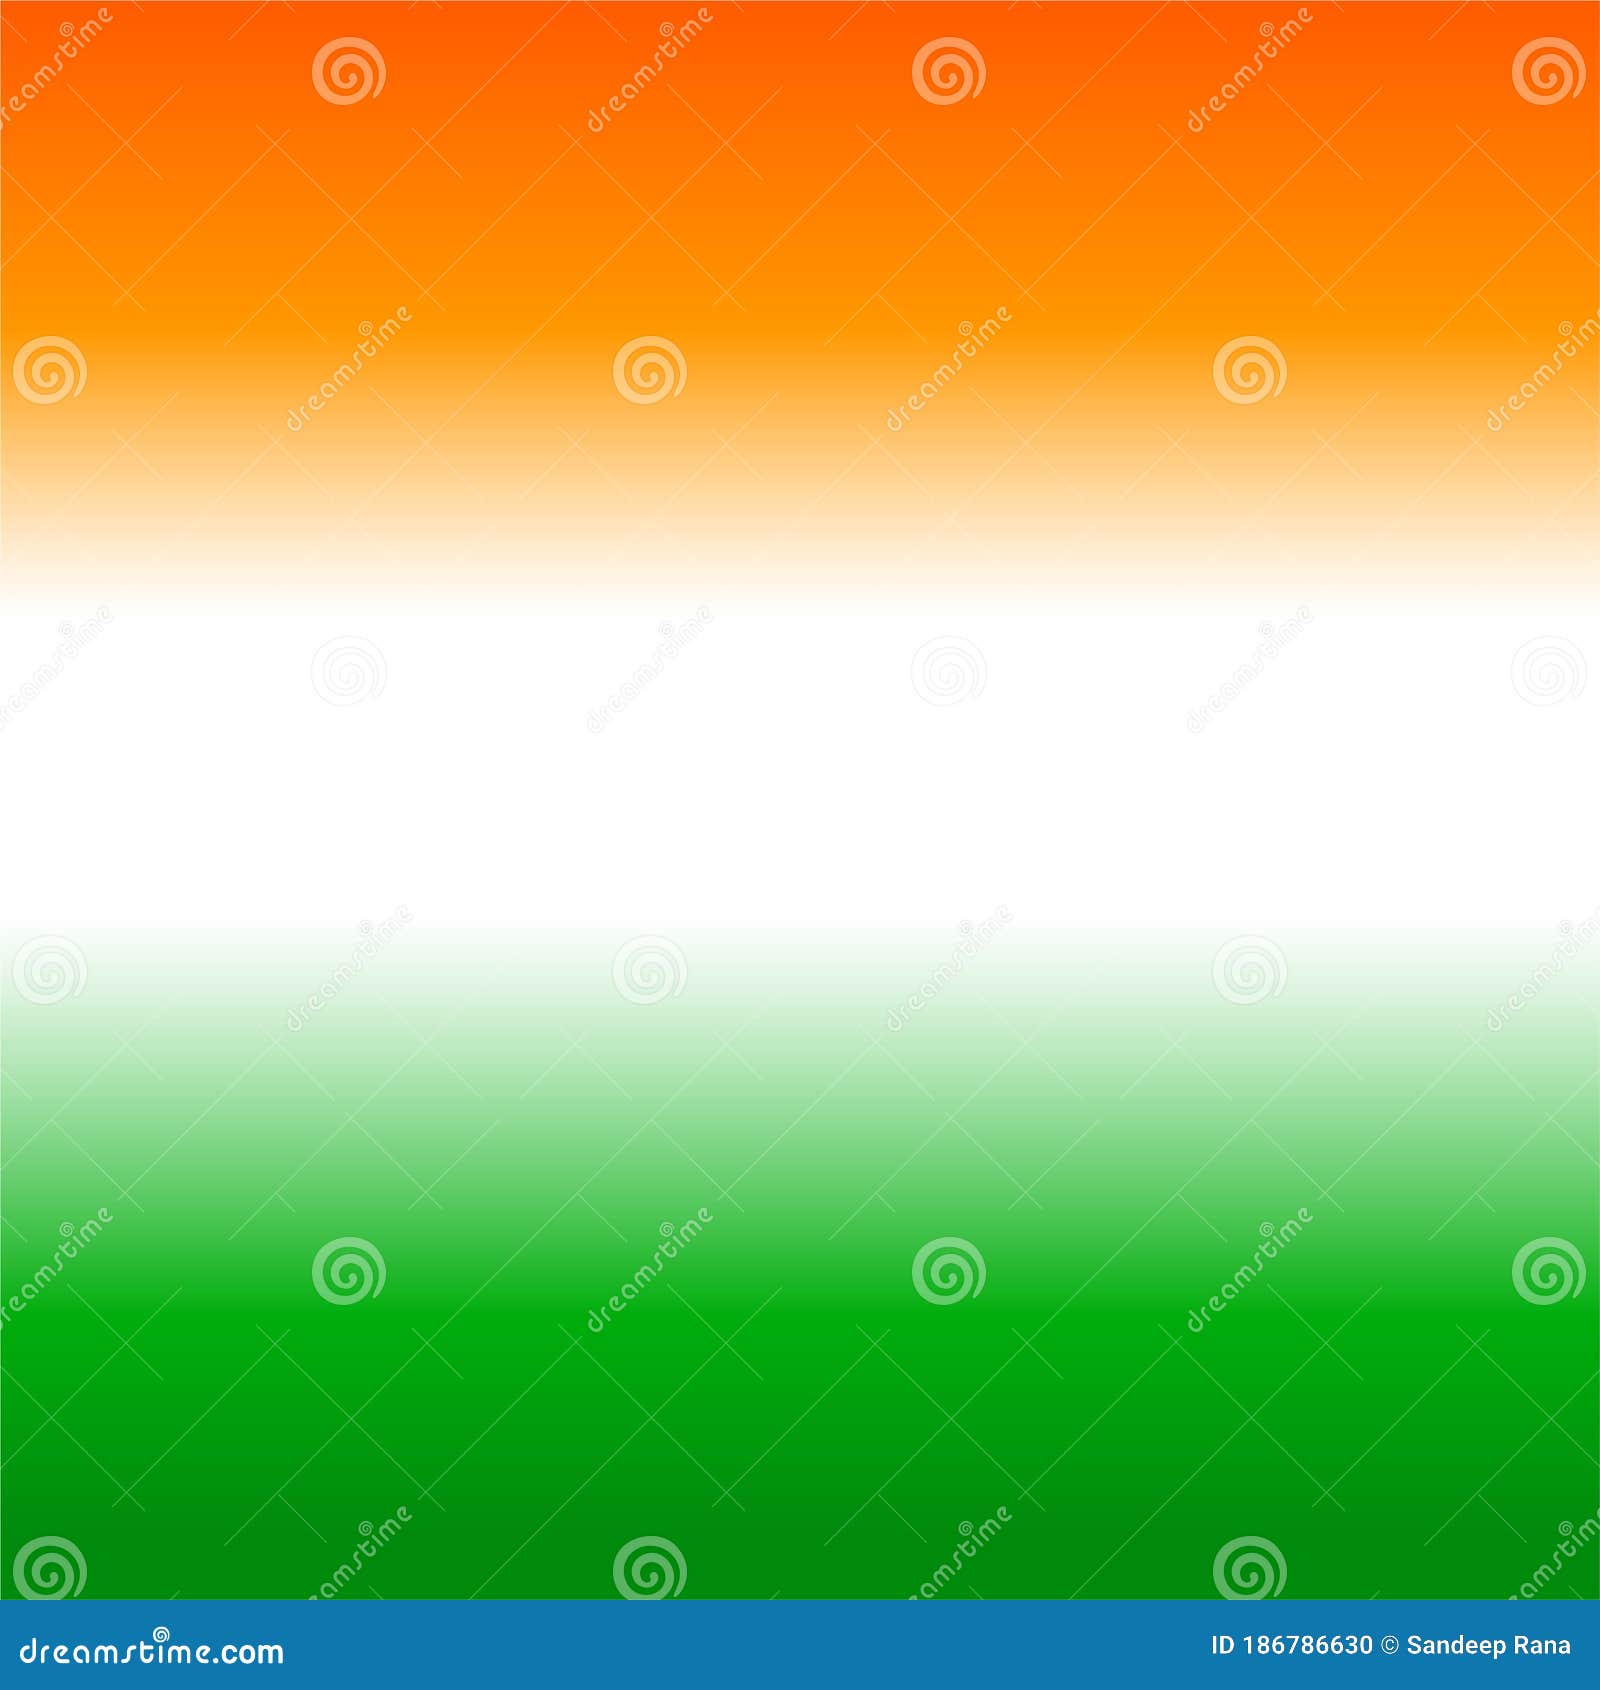 Tri Color Gradient Vector of Orange, White and Green Colour for Background.  Stock Vector - Illustration of background, blurred: 186786630